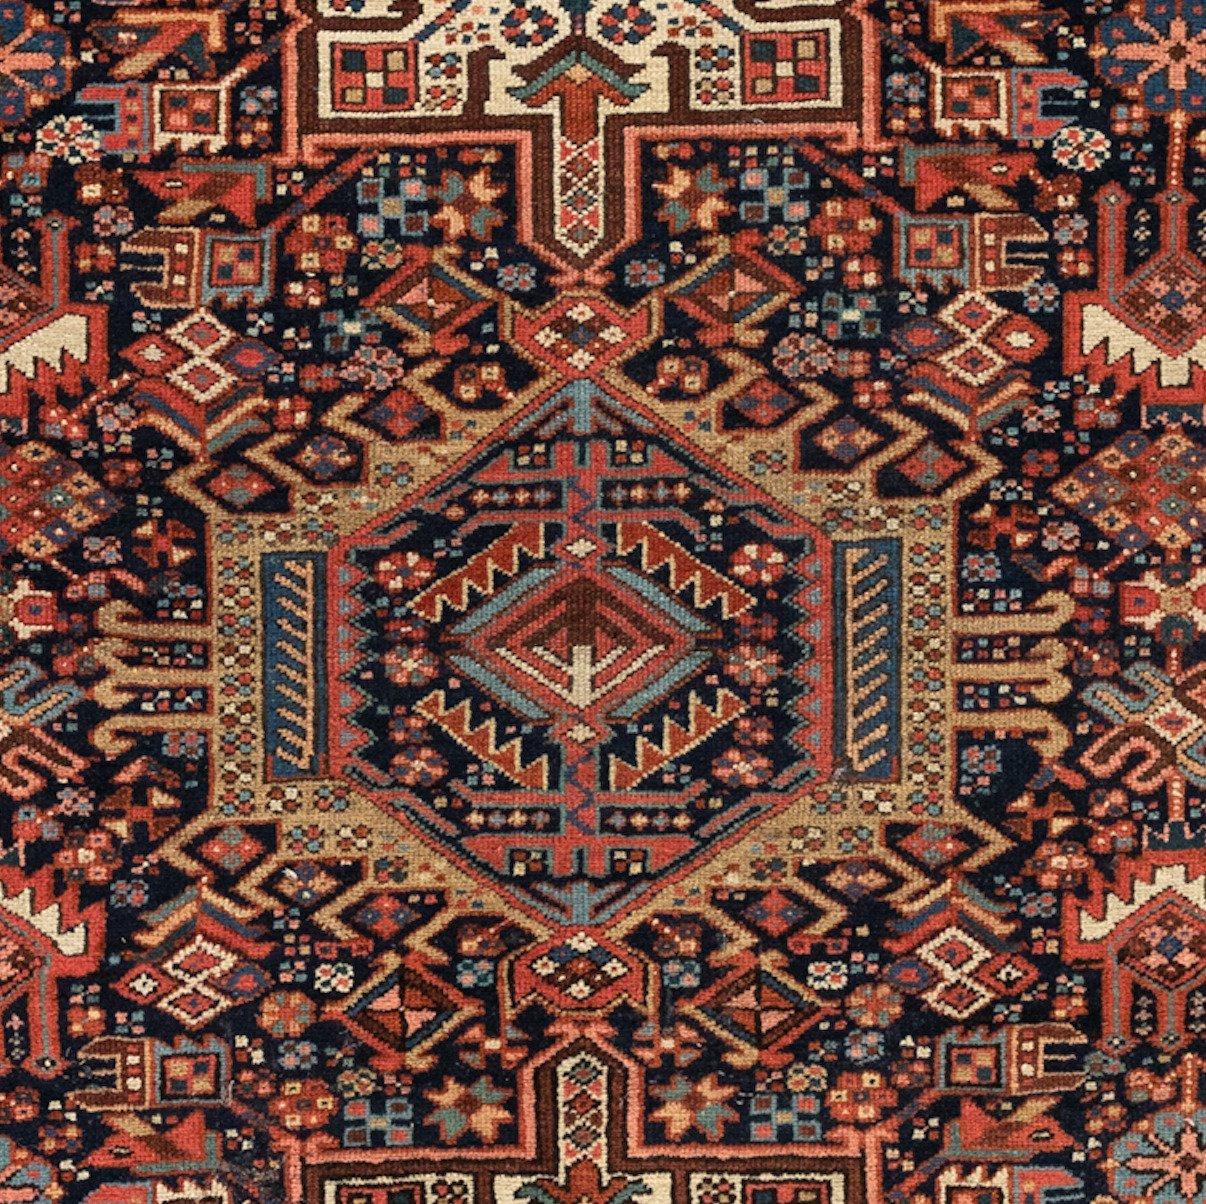 Antique Karaja (Black Mountain) rugs are woven in Iran near the Caucasian border and therefore exhibit Caucasian styles and motifs. This carpet measures 4.9 x 6.4 ft and is from 1940s.